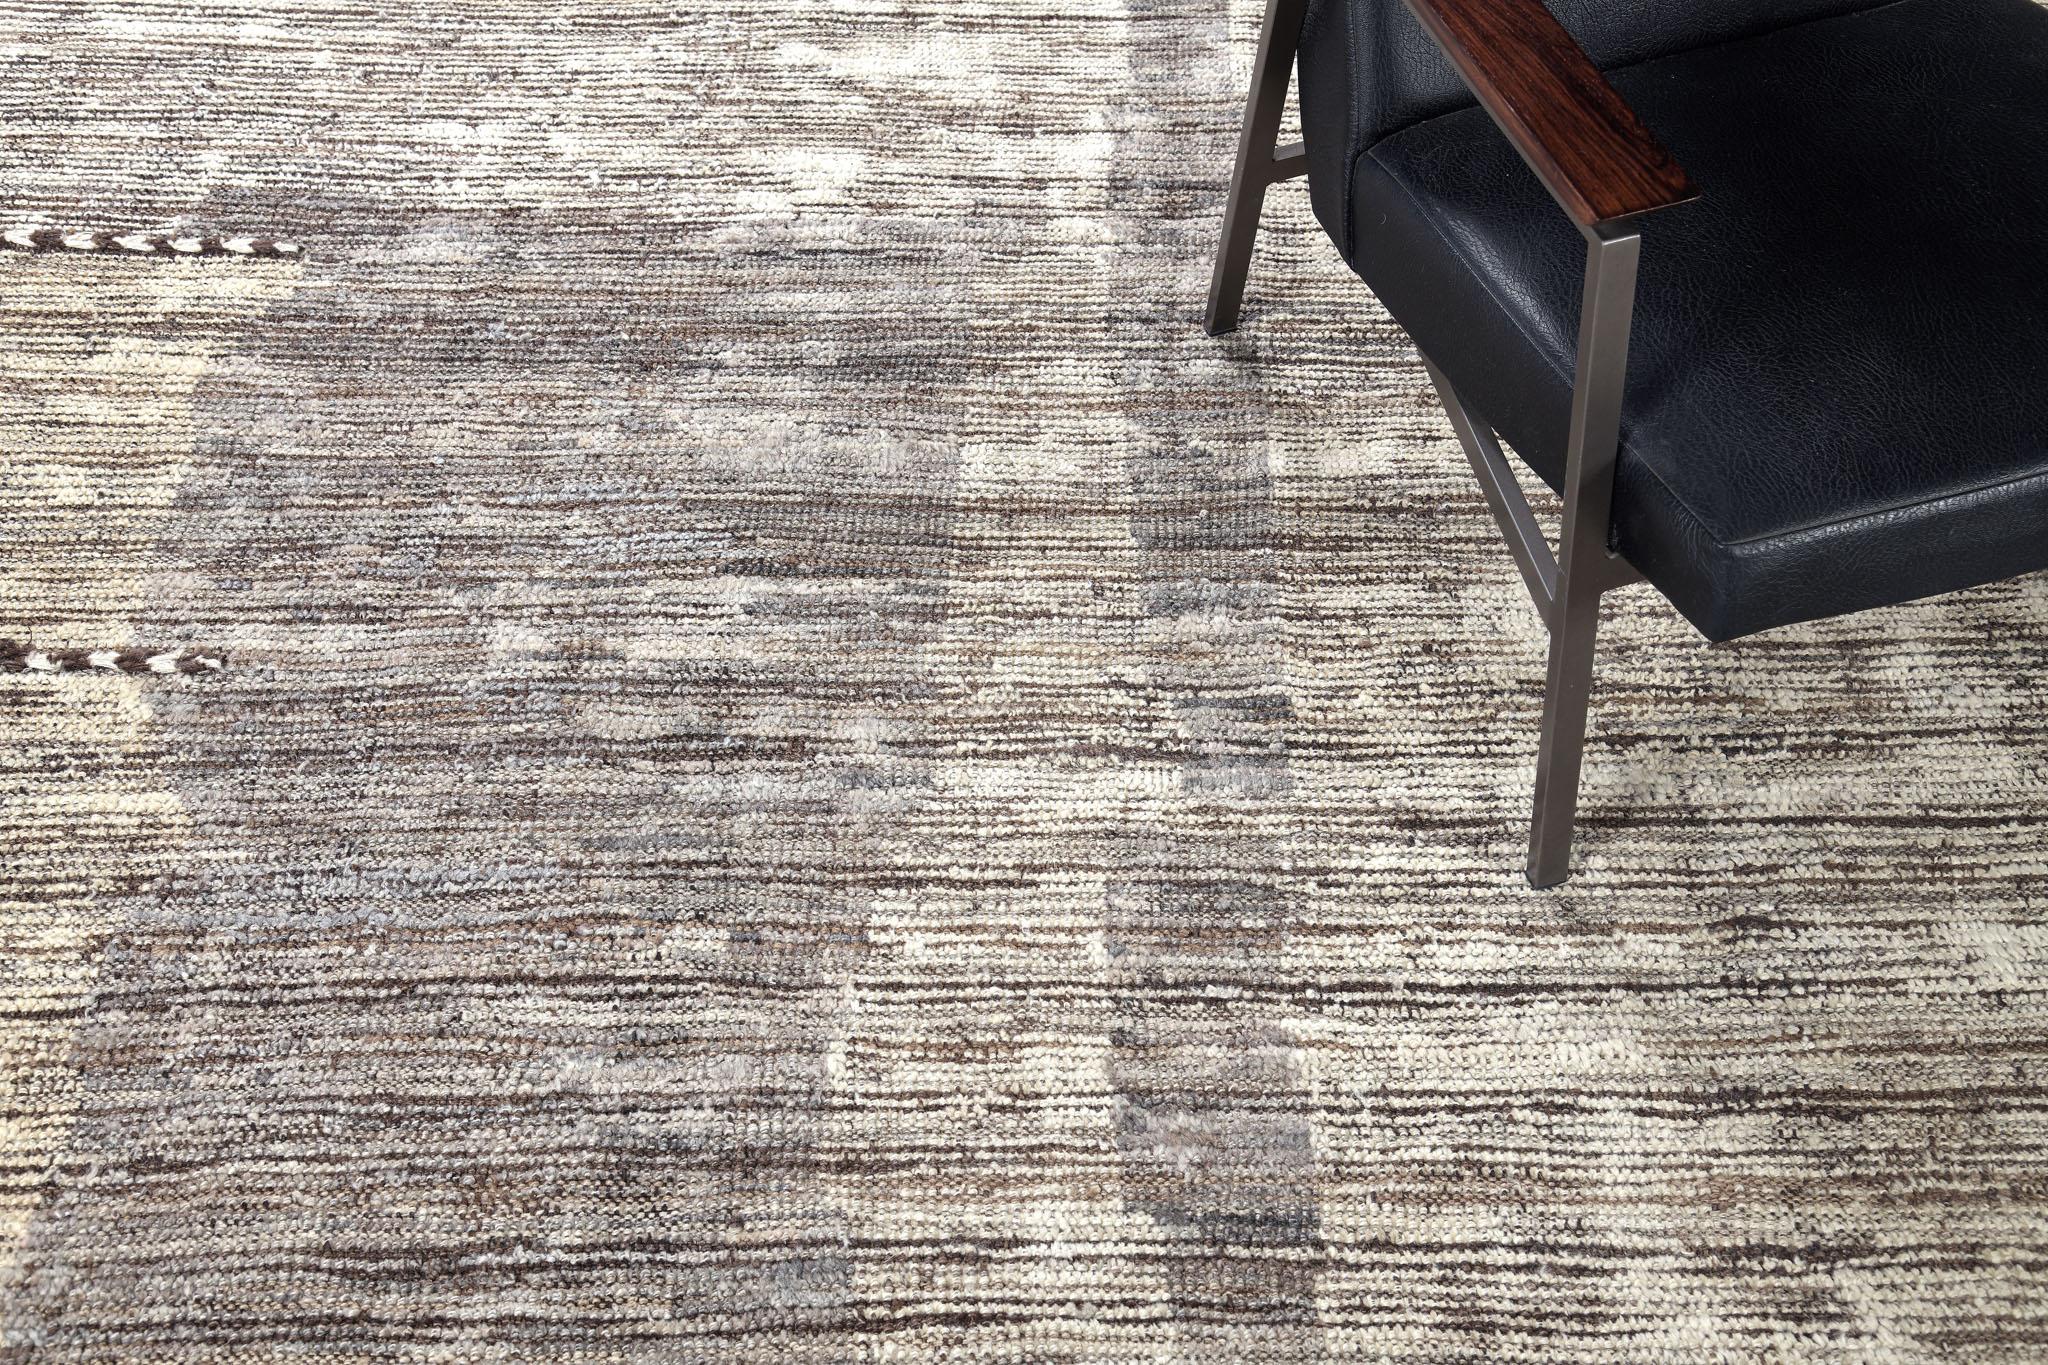 Sittima is an interplay between neutral tones and soothing earth colors in a modern-day interpretation of the Moroccan world. This rug's play of textures, linework, and simplicity is what makes the Atlas Collection so unique and sought after.